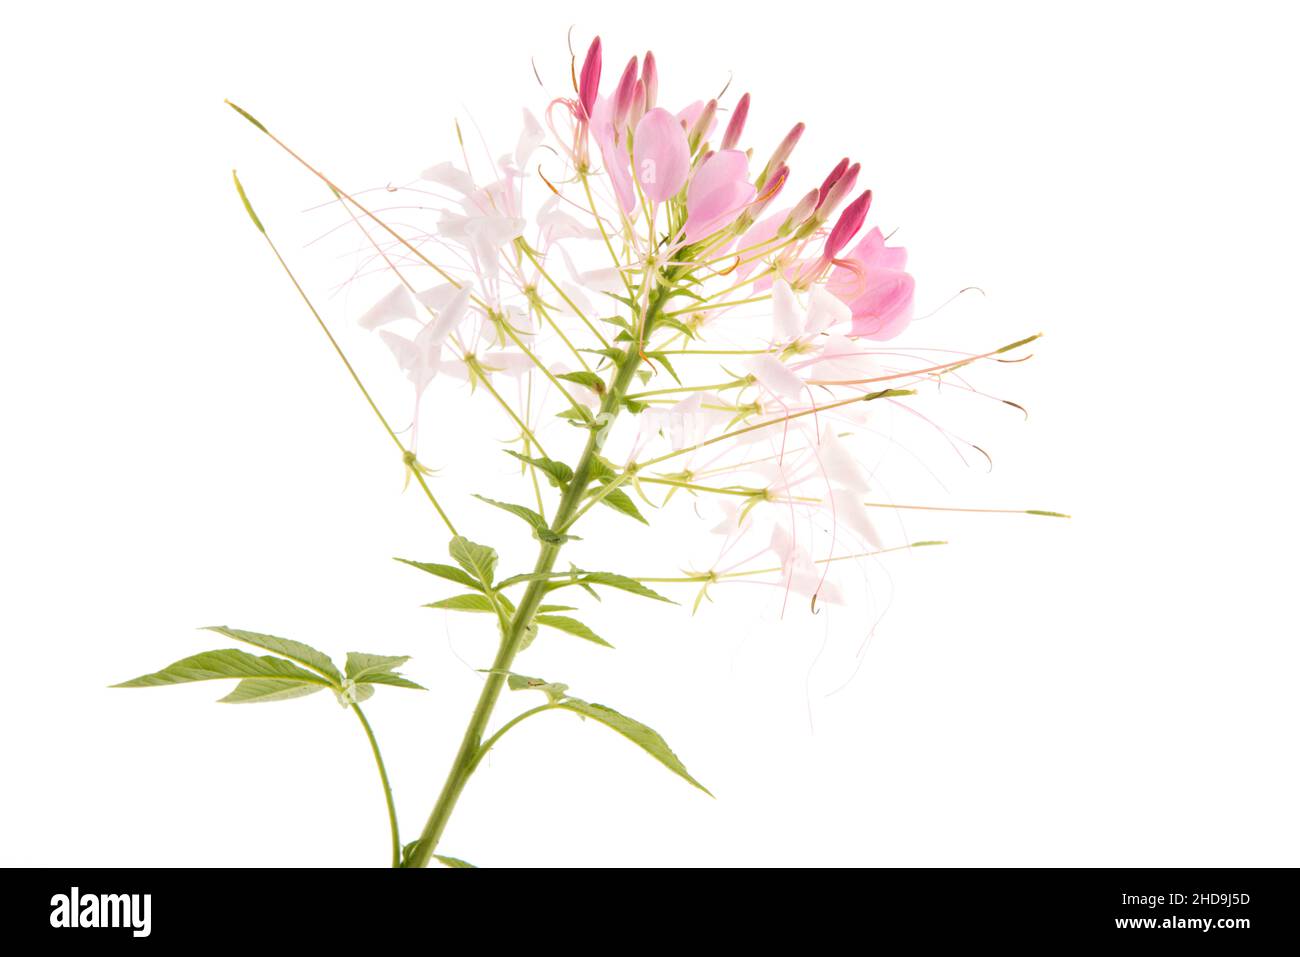 Single flower pink Cleome isolated over white background Stock Photo